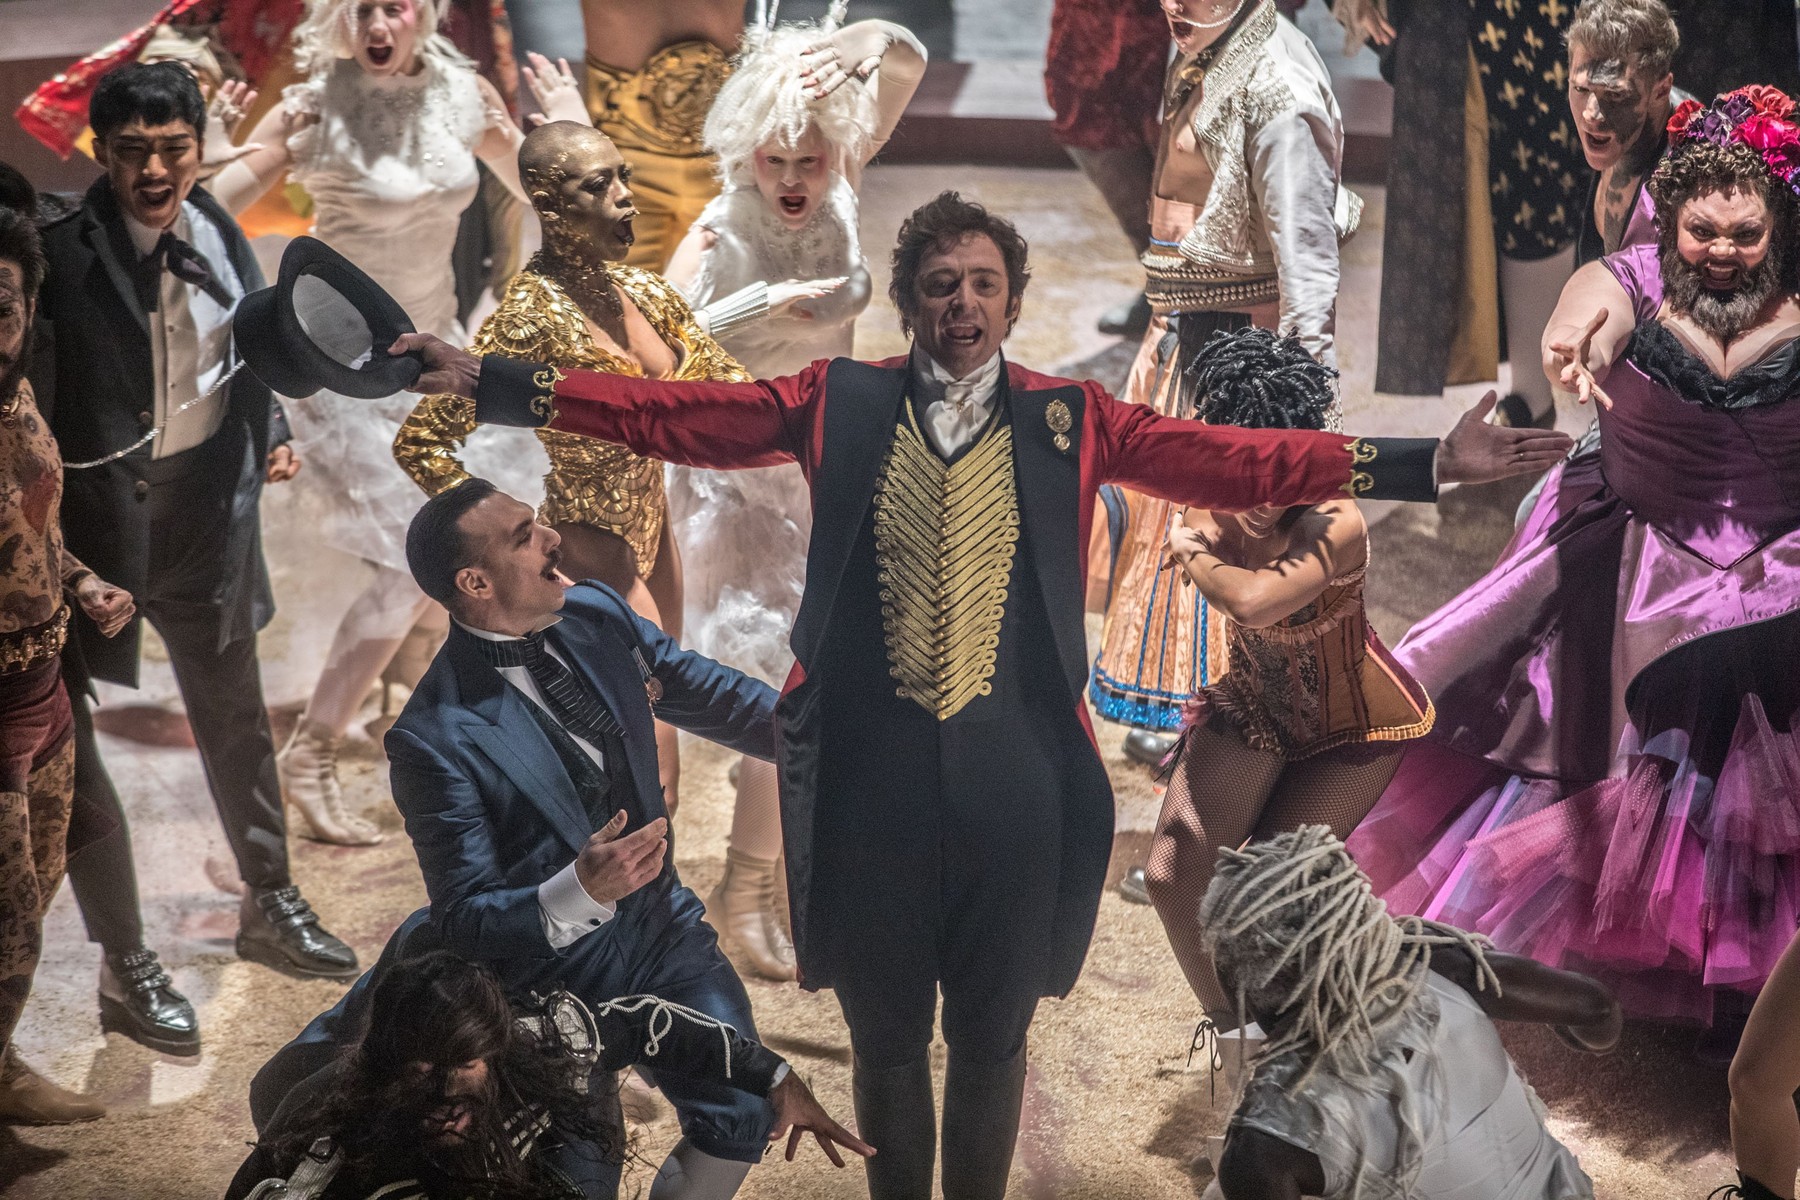 Film Review for the new history musical drama THE GREATEST SHOWMAN, opening in theatres December 20th 2017. | Film Review for the new history musical drama THE GREATEST SHOWMAN, opening in theatres December 20th 2017.